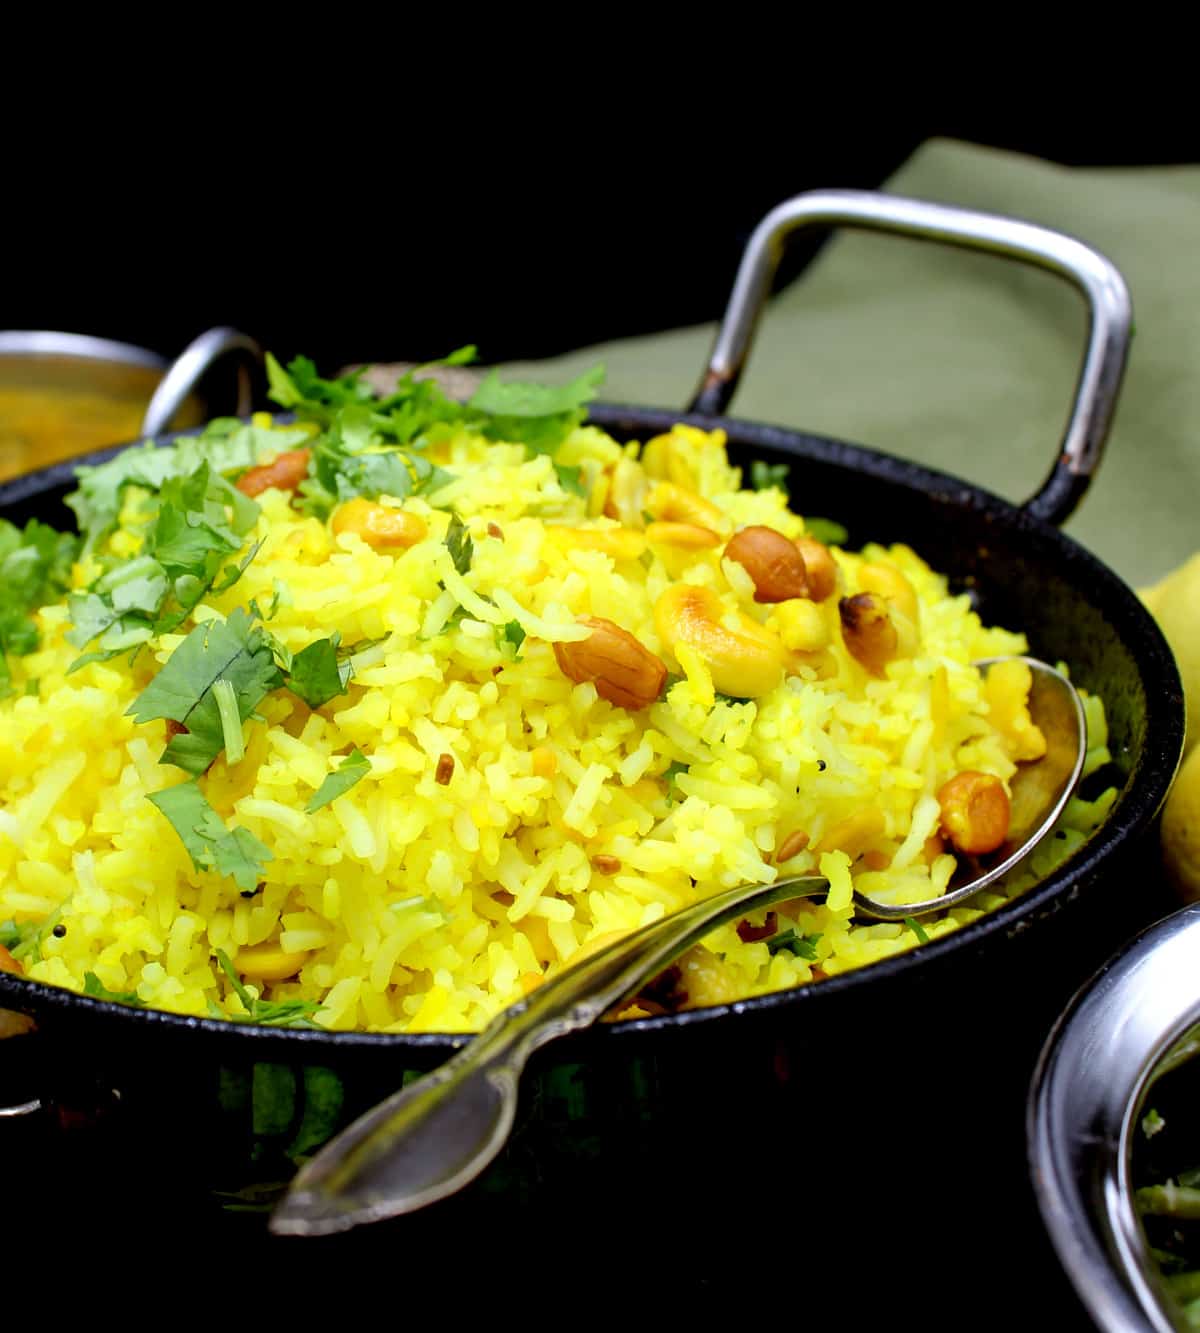 Front partial shot of a steel kadhai with bright yellow lemon rice with mustard seeds, cilantro, peanuts, cashews and red pepper, surrounded by other dishes. Also in the shot is a green and gold napkin and lemons on a black background.